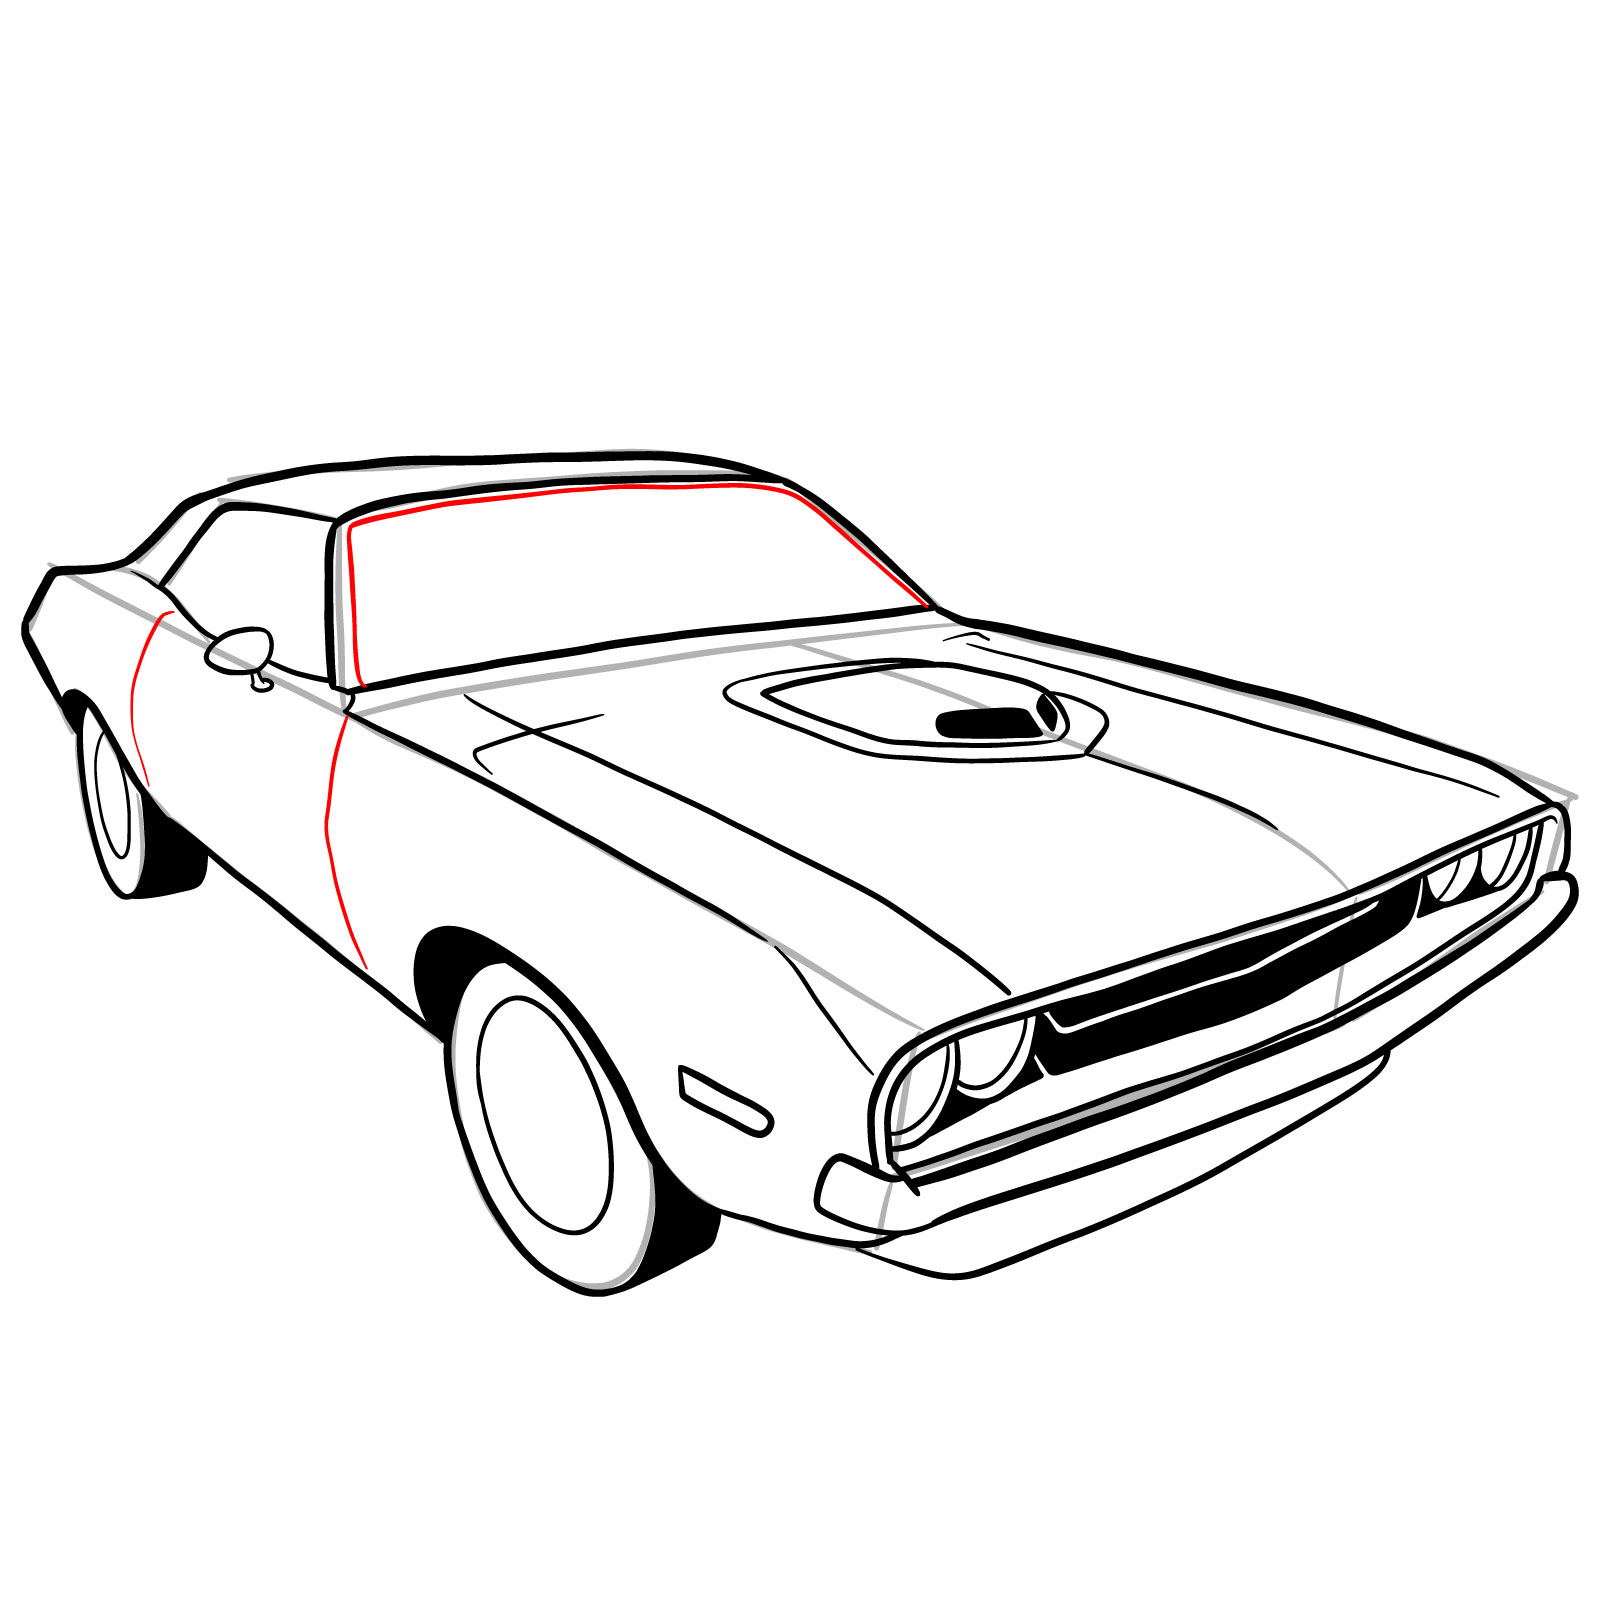 How to draw Dodge Challenger 1970 - step 30